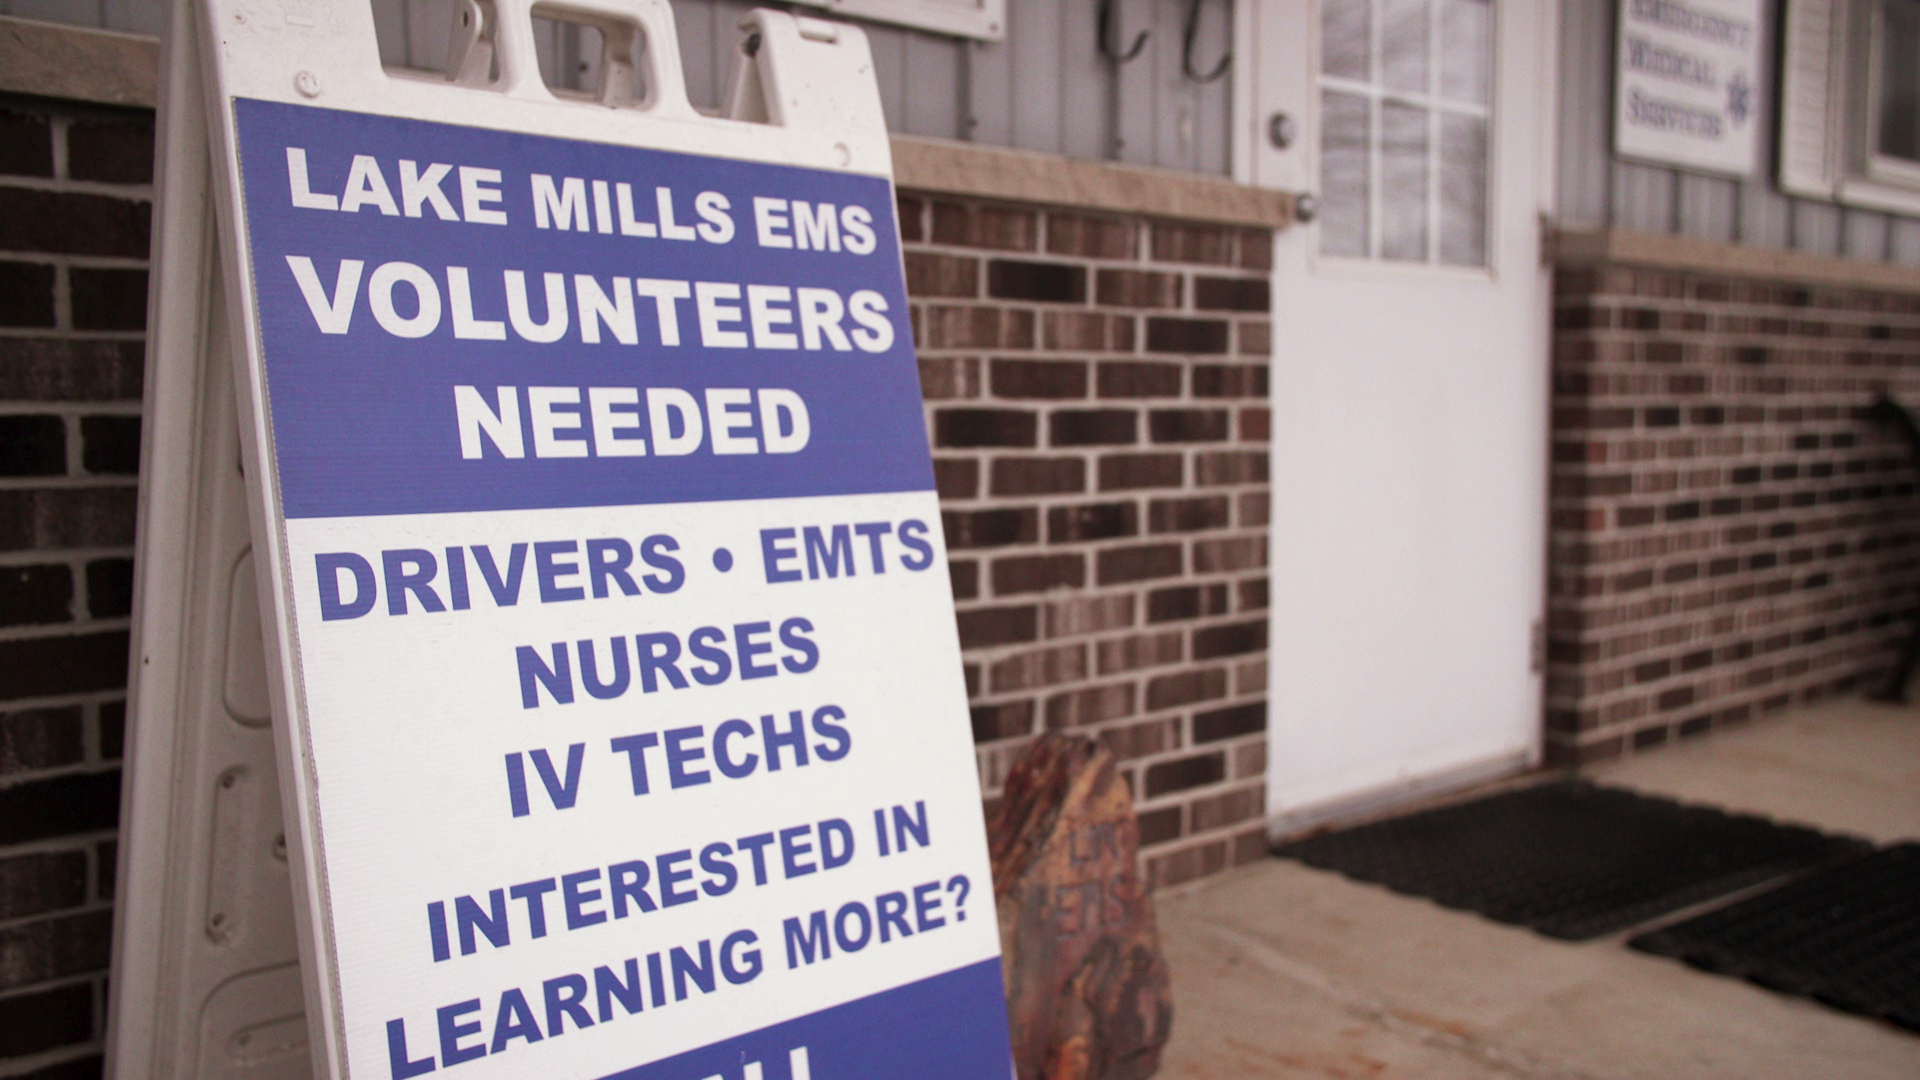 A sandwich board sign placed near a door of a building with brick and wood siding reads "Lake Mills EMS Volunteers Needed," "Drivers • EMTs • Nurses • IV Techs • Interested in Learning More?"